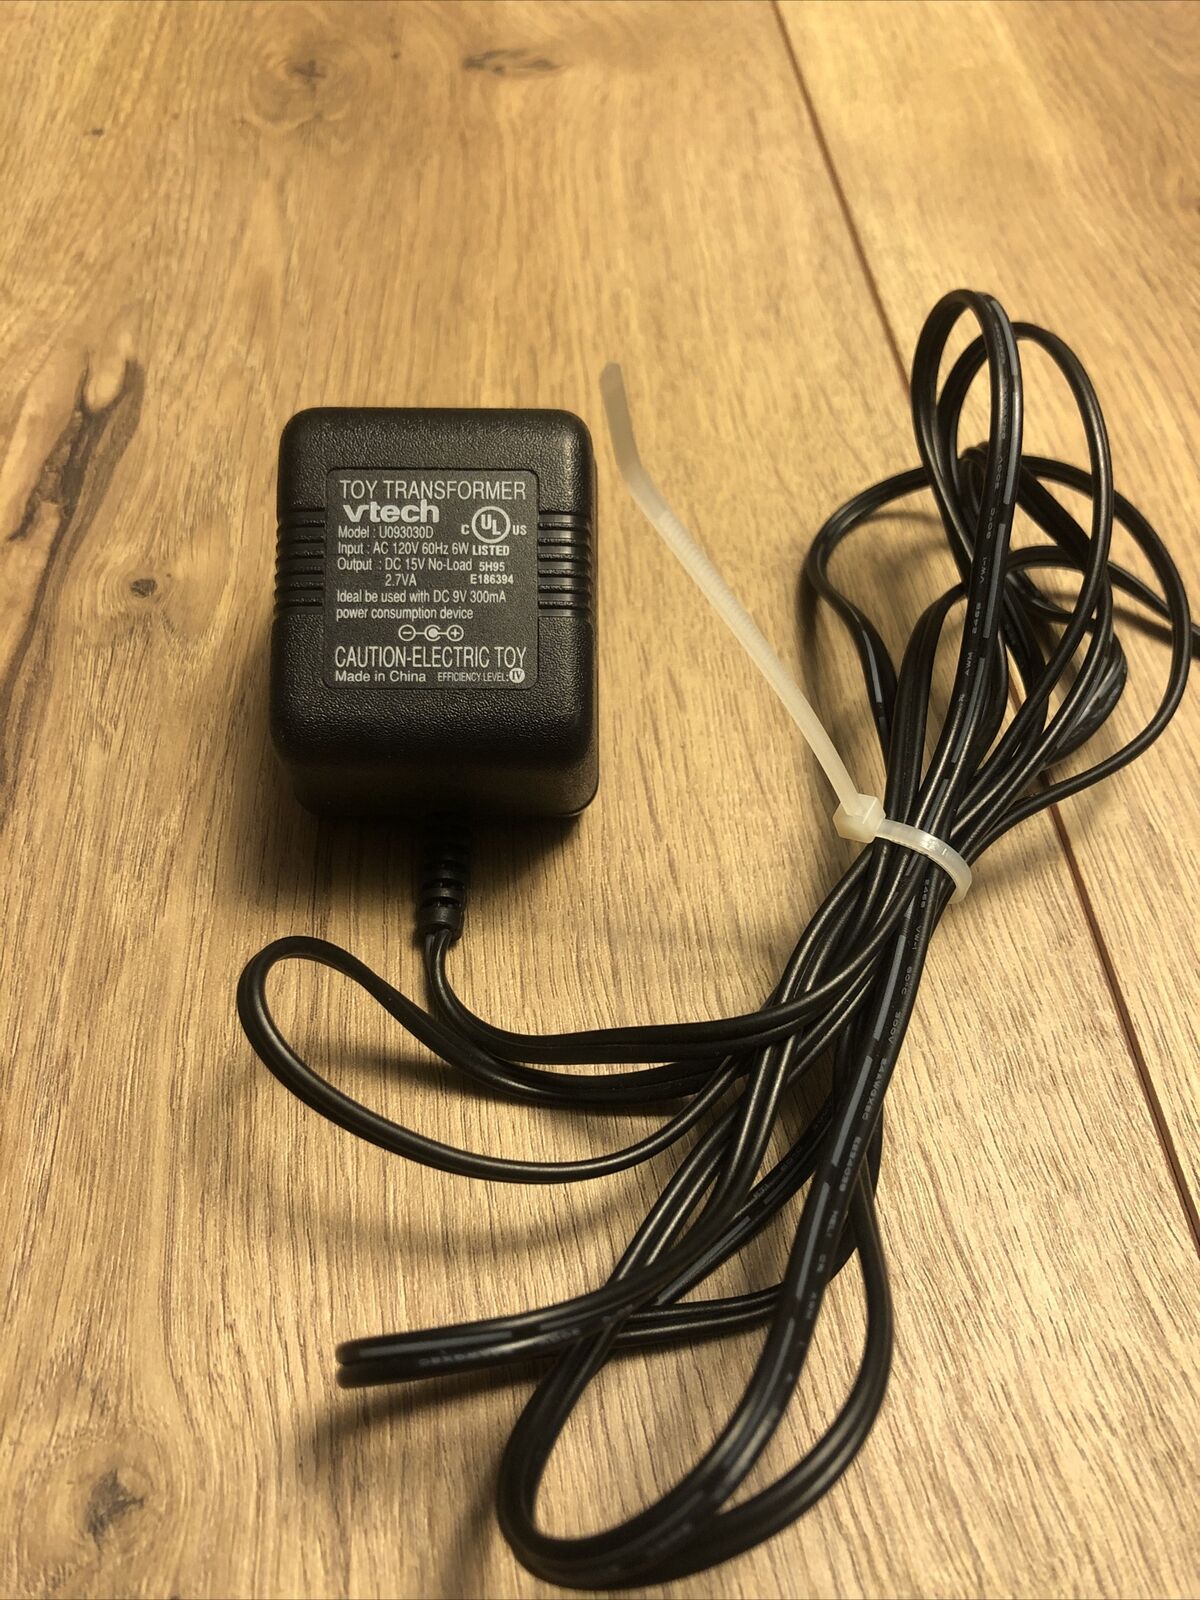 VTECH TOY TRANSFORMER U093030D AC ADAPTER OUTPUT15V DC CORD CHARGER Brand: VTech Type: AC to DC wall adapter Produ